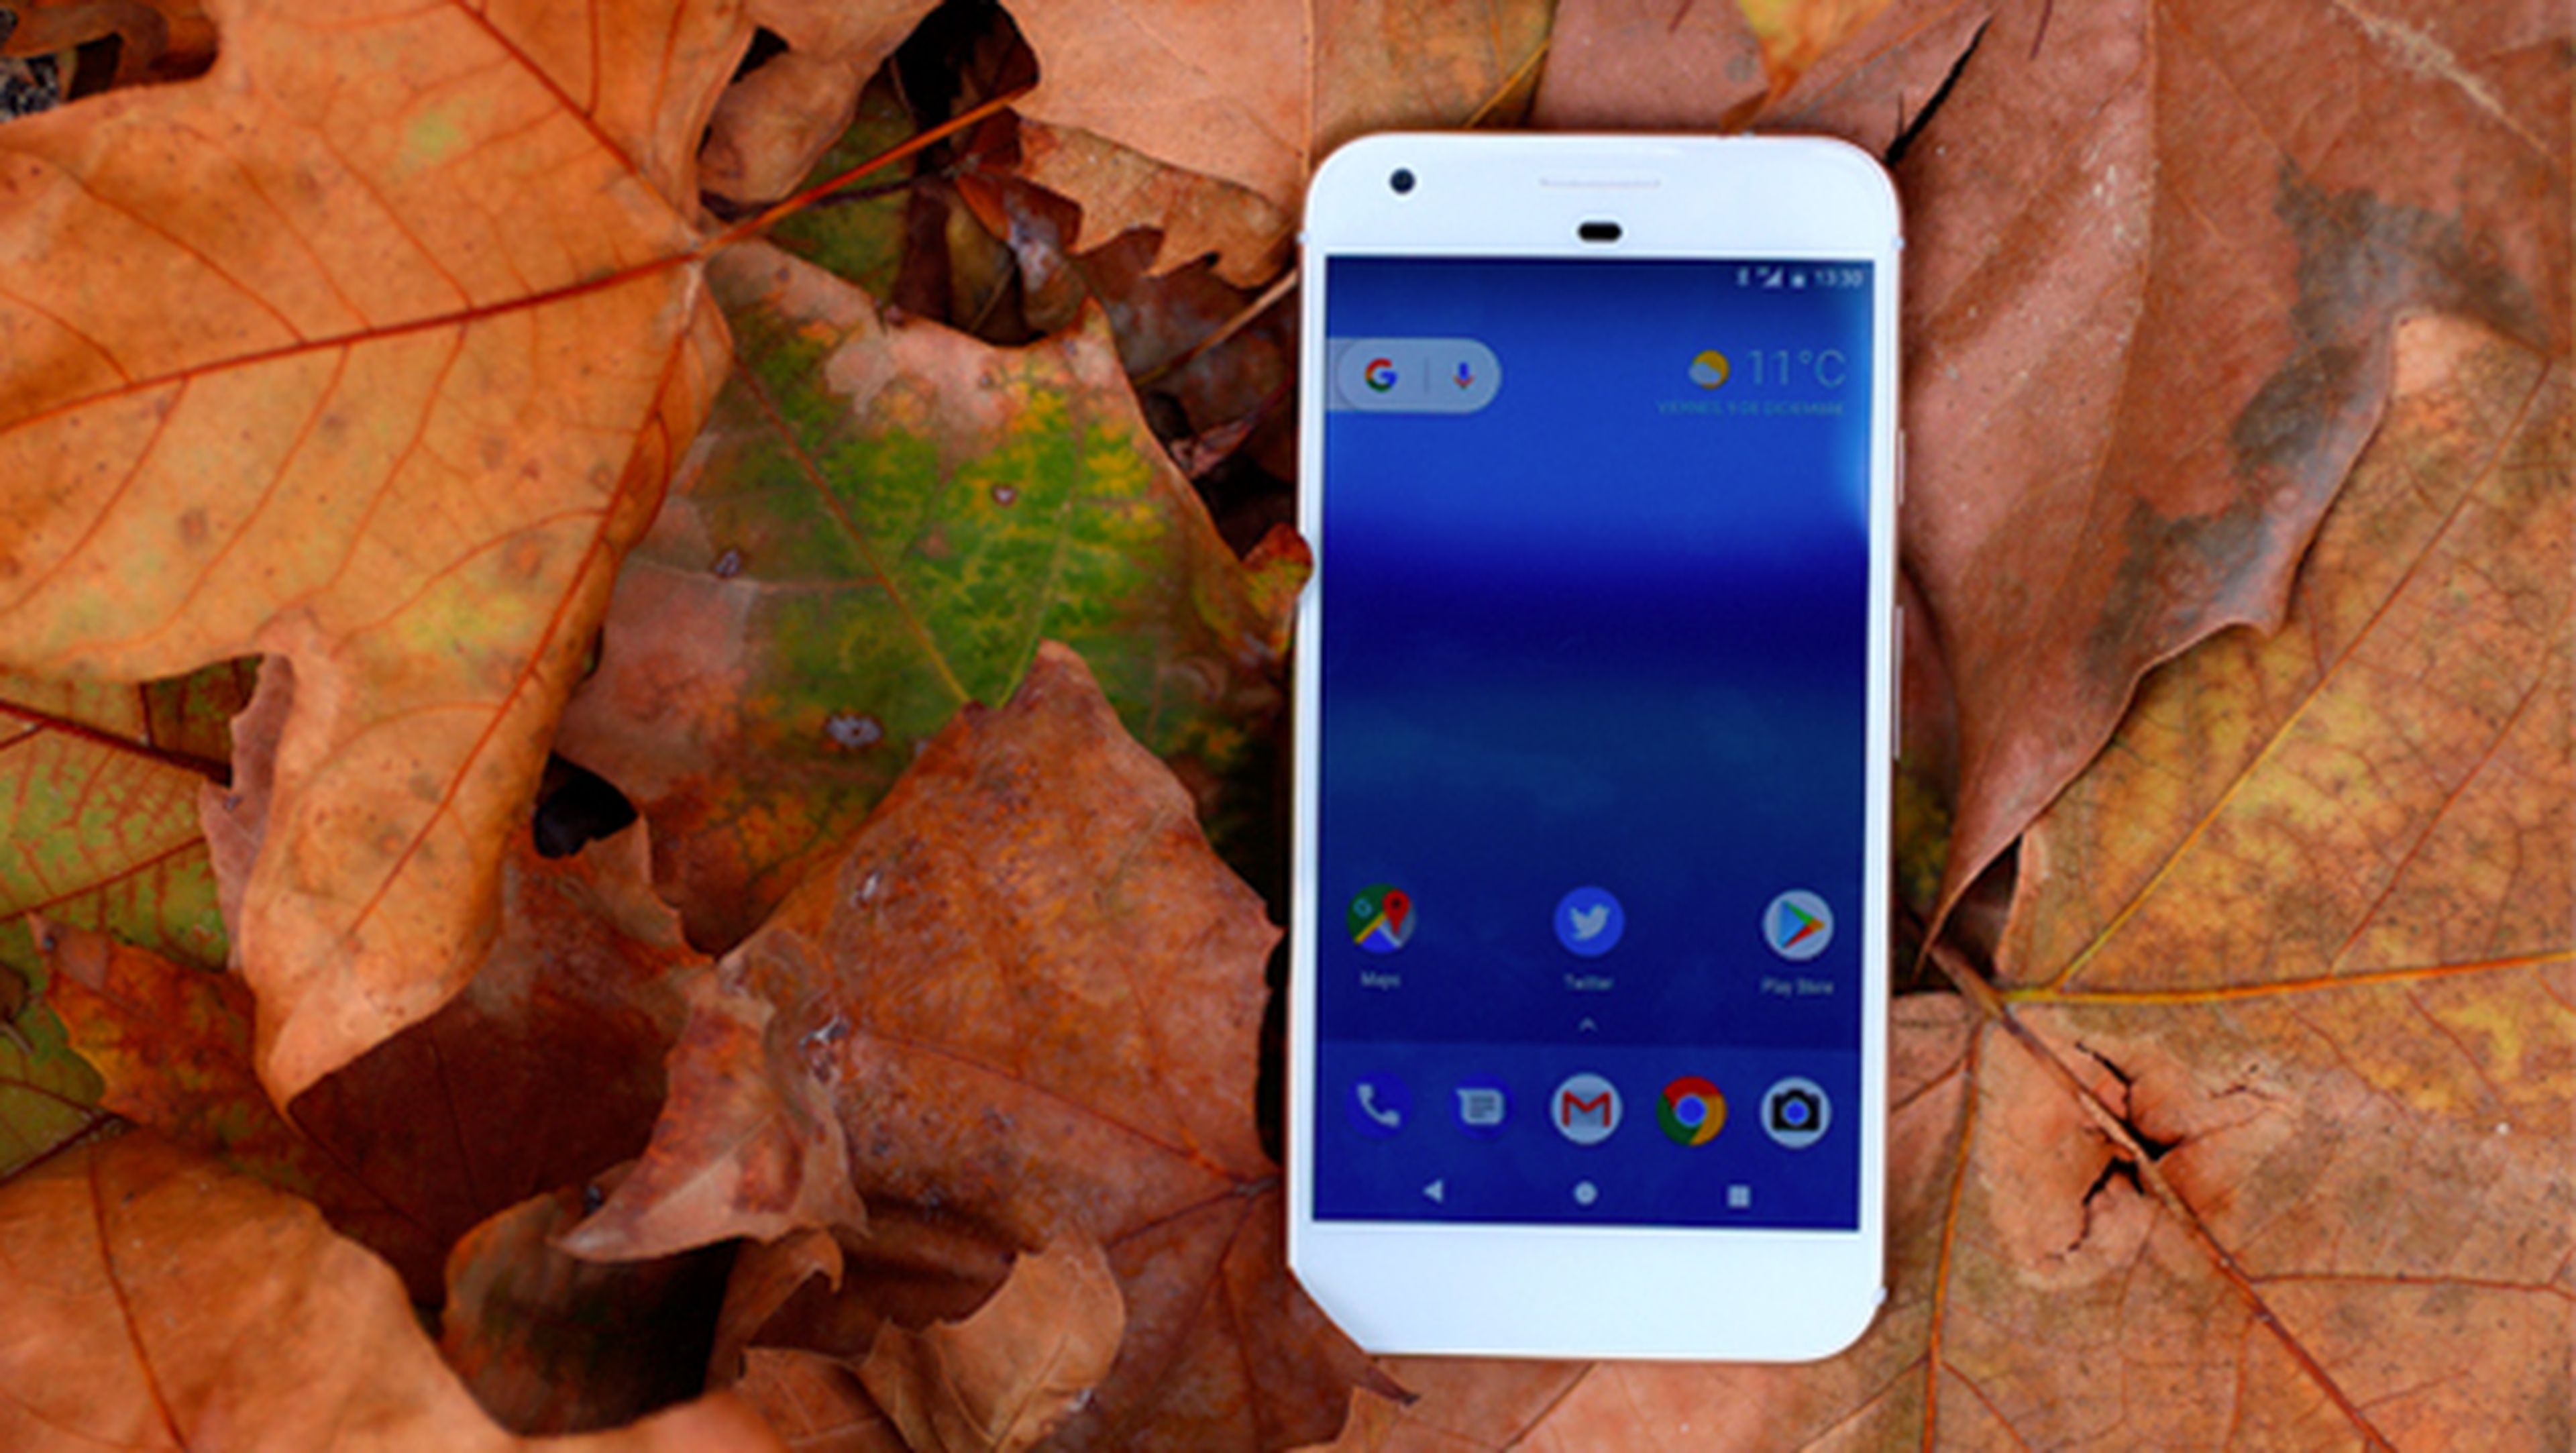 Google Pixel (Android 7.1.1)